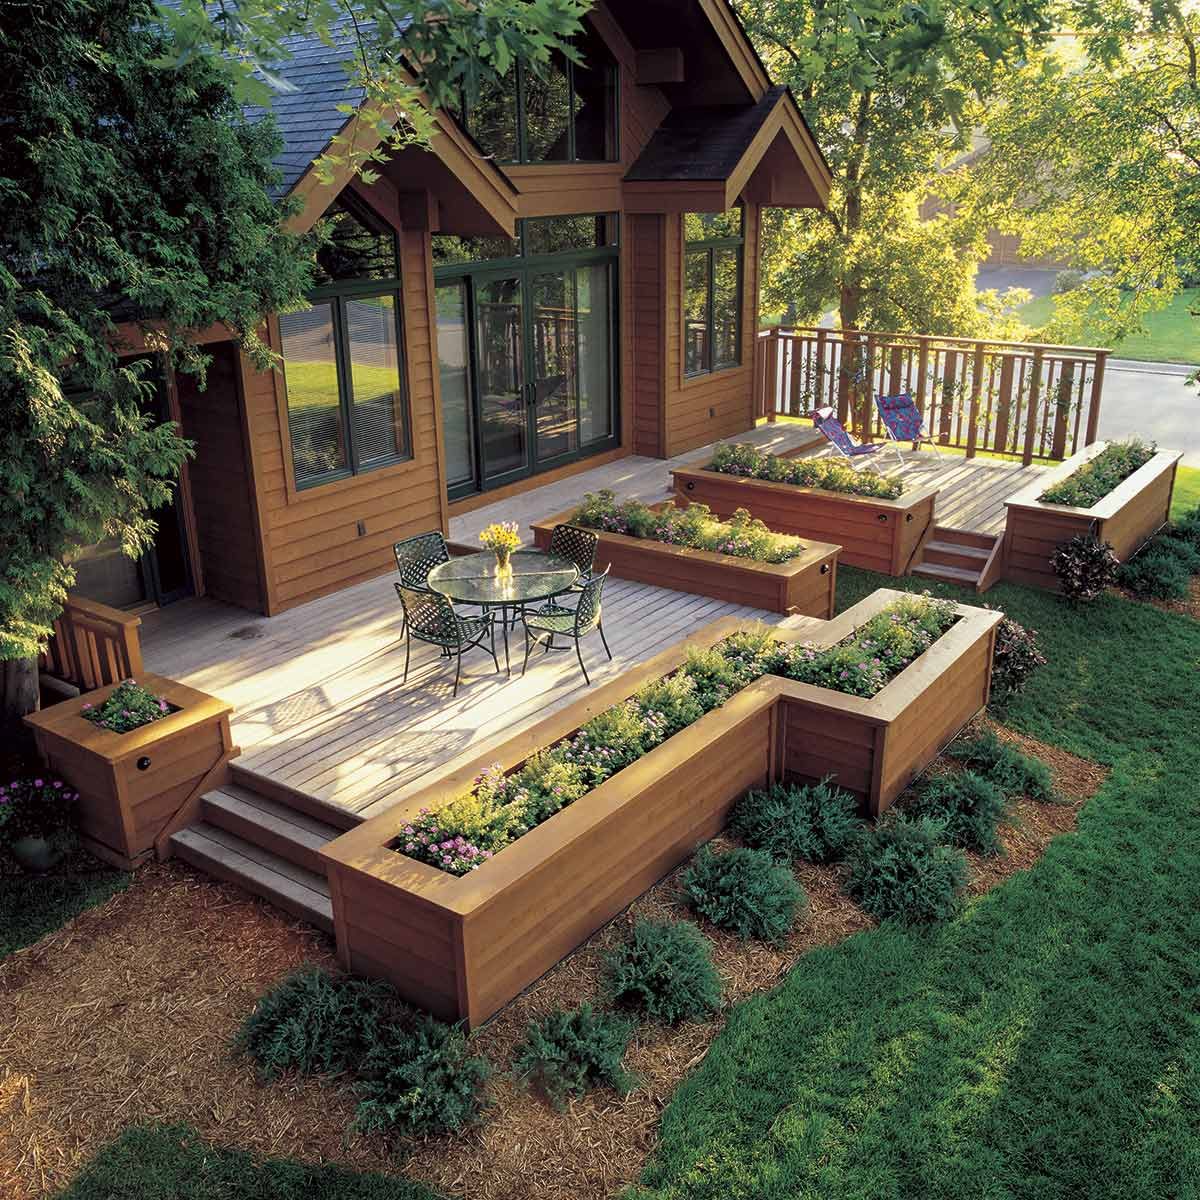 14 DIY Deck Add-Ons That are Seriously Cool | Family Handyman